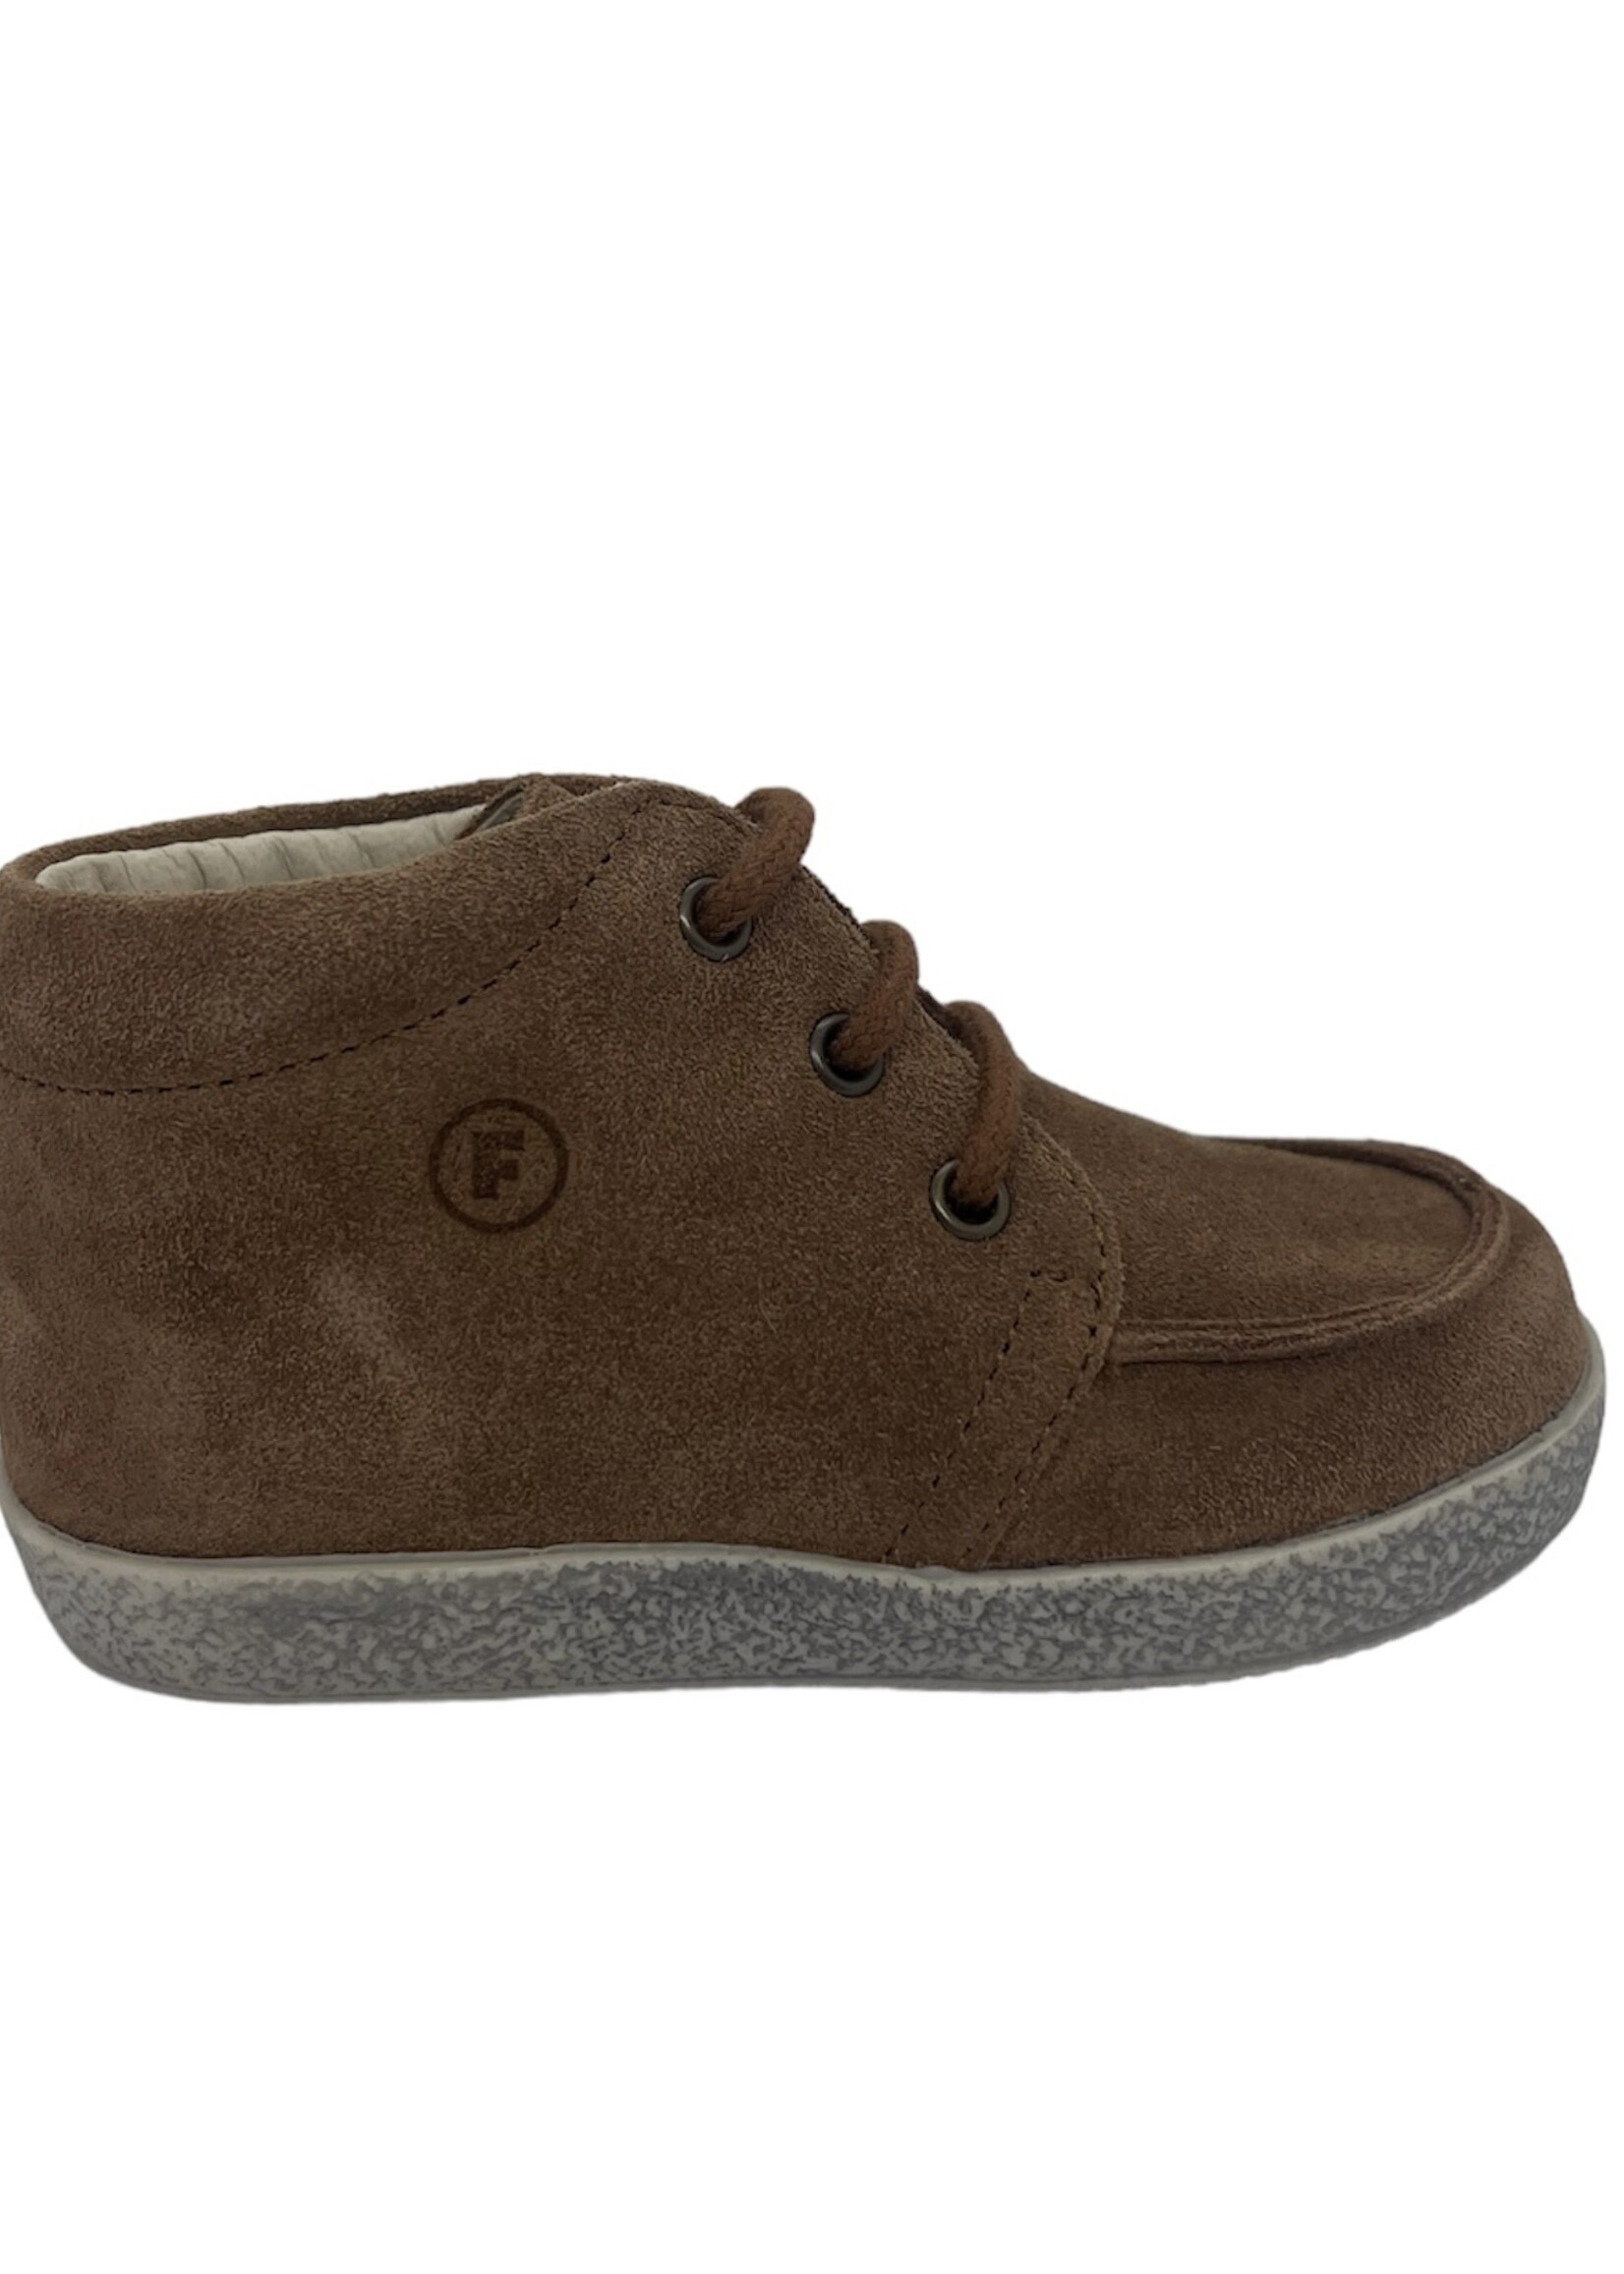 Falcotto ostrit suede brown